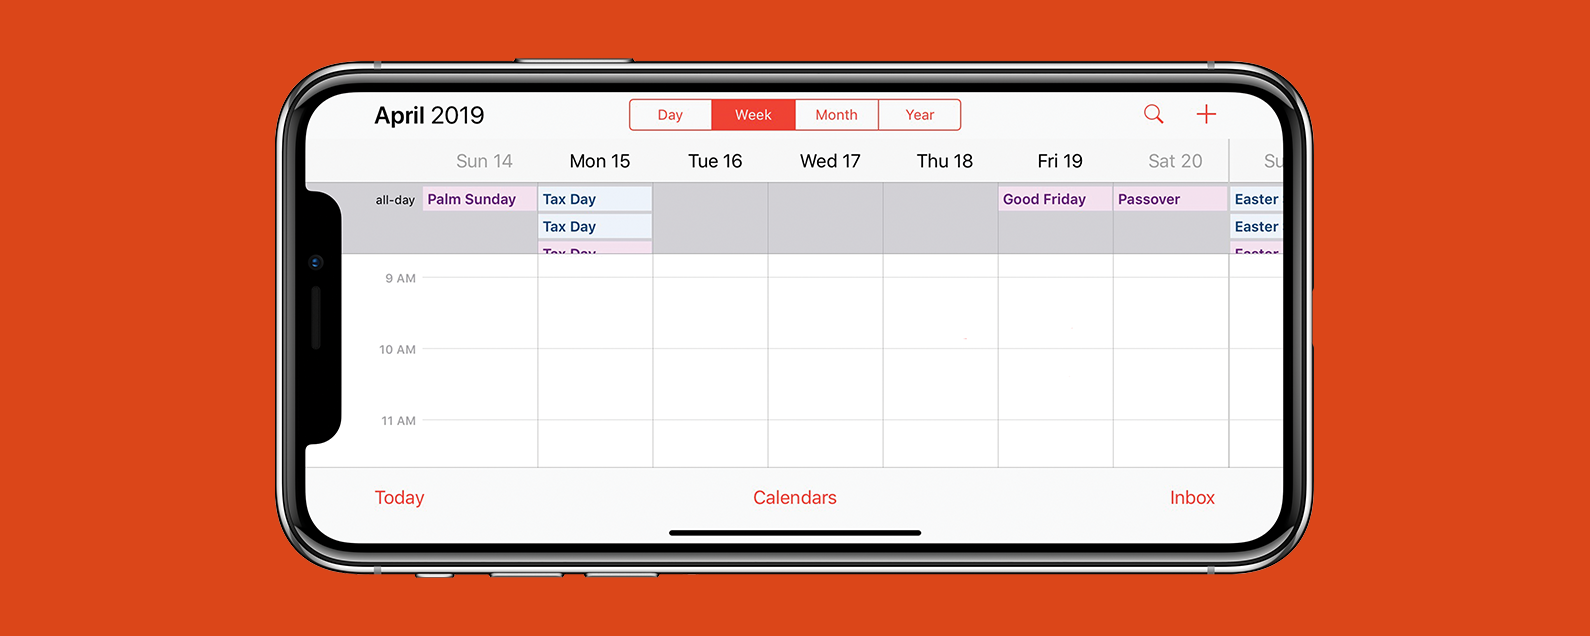 how-to-see-the-week-view-in-the-calendar-app-on-your-iphone